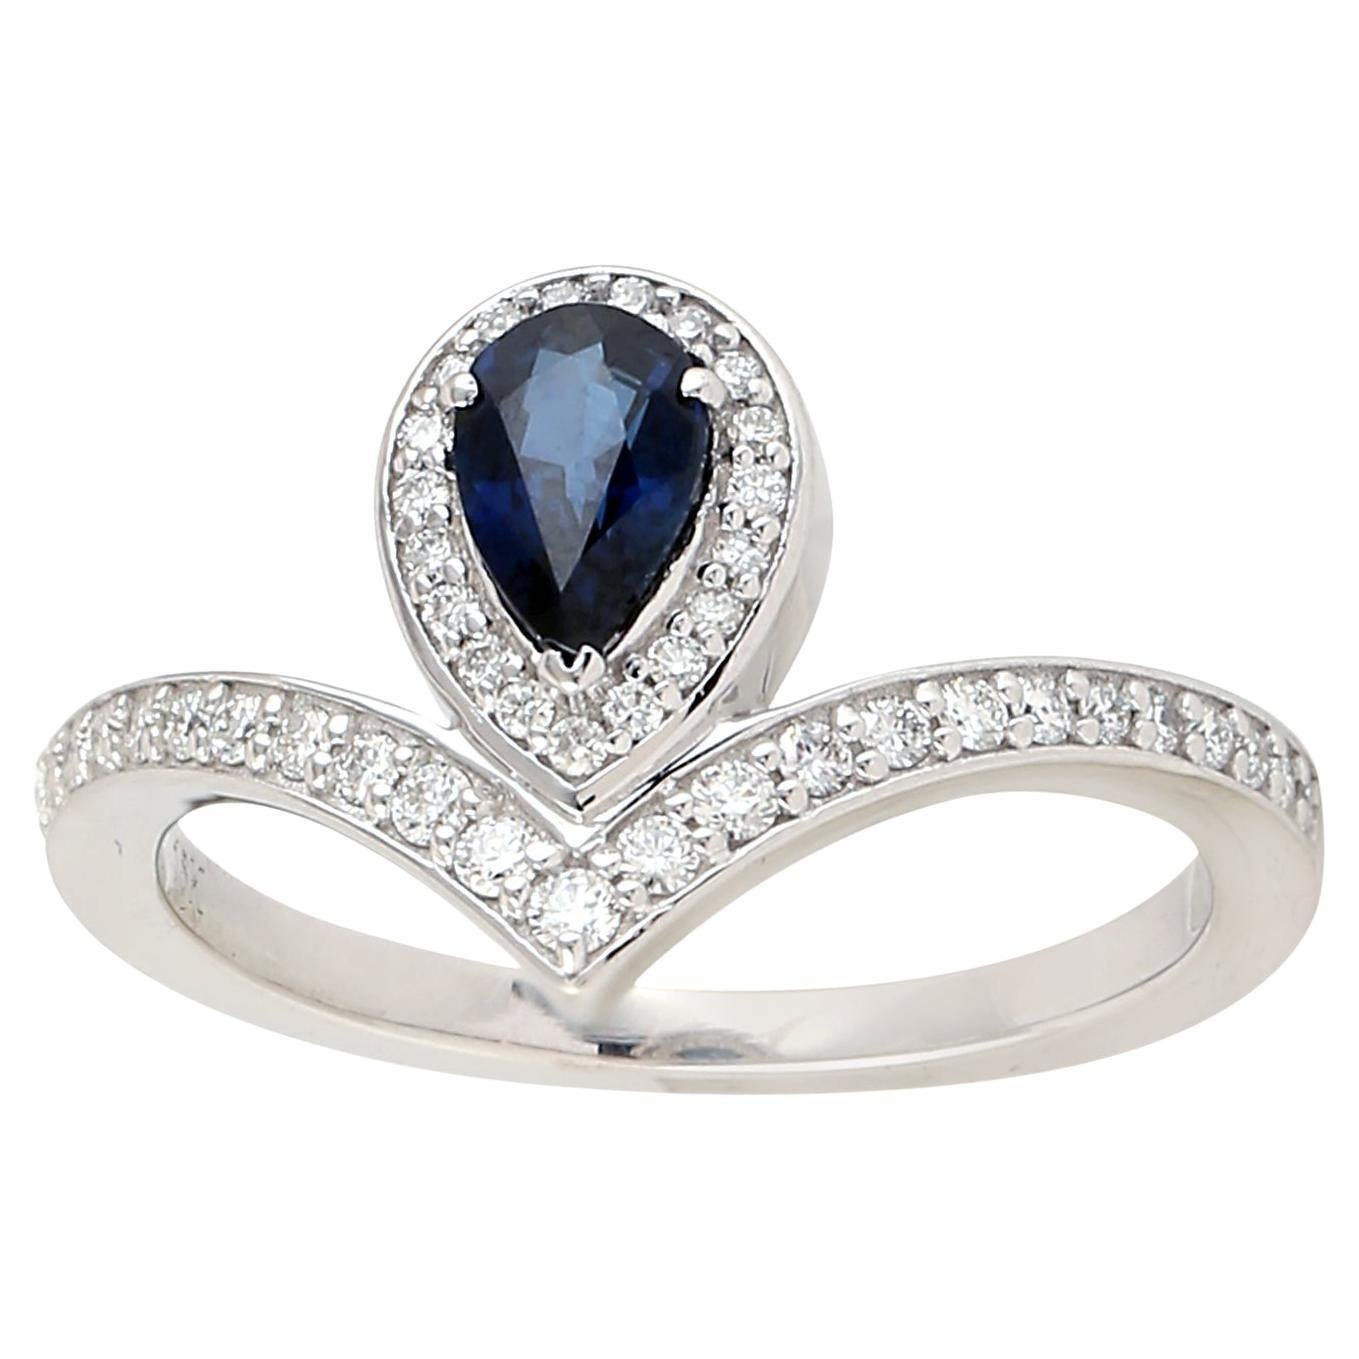 Pear Shaped Center Stone Sapphire Ring With Diamonds Made In 18k Gold For Sale